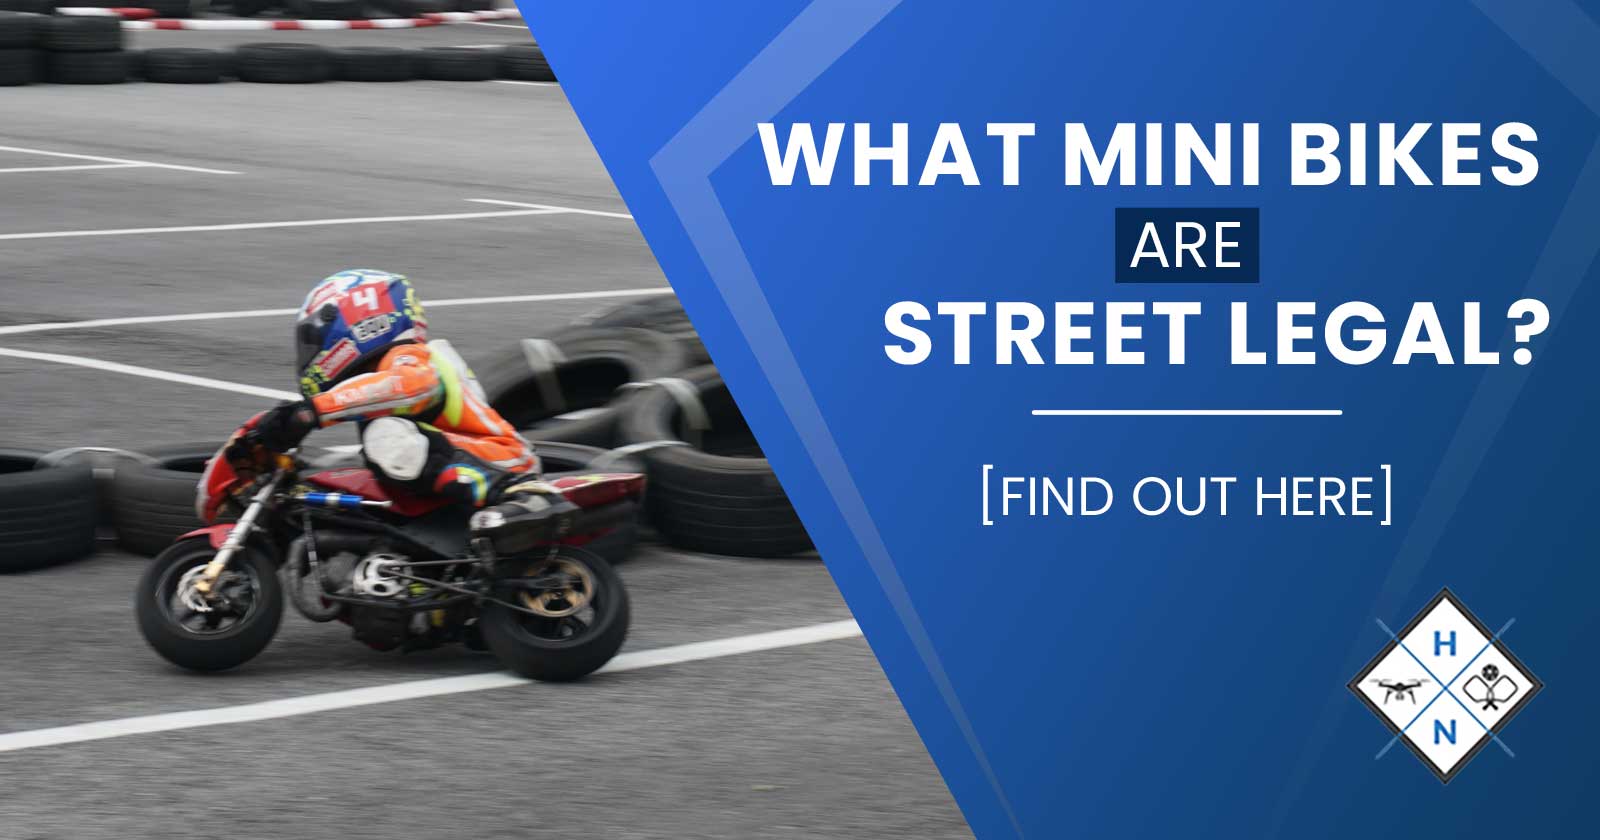 What Mini Bikes Are Street Legal? [FIND OUT HERE]